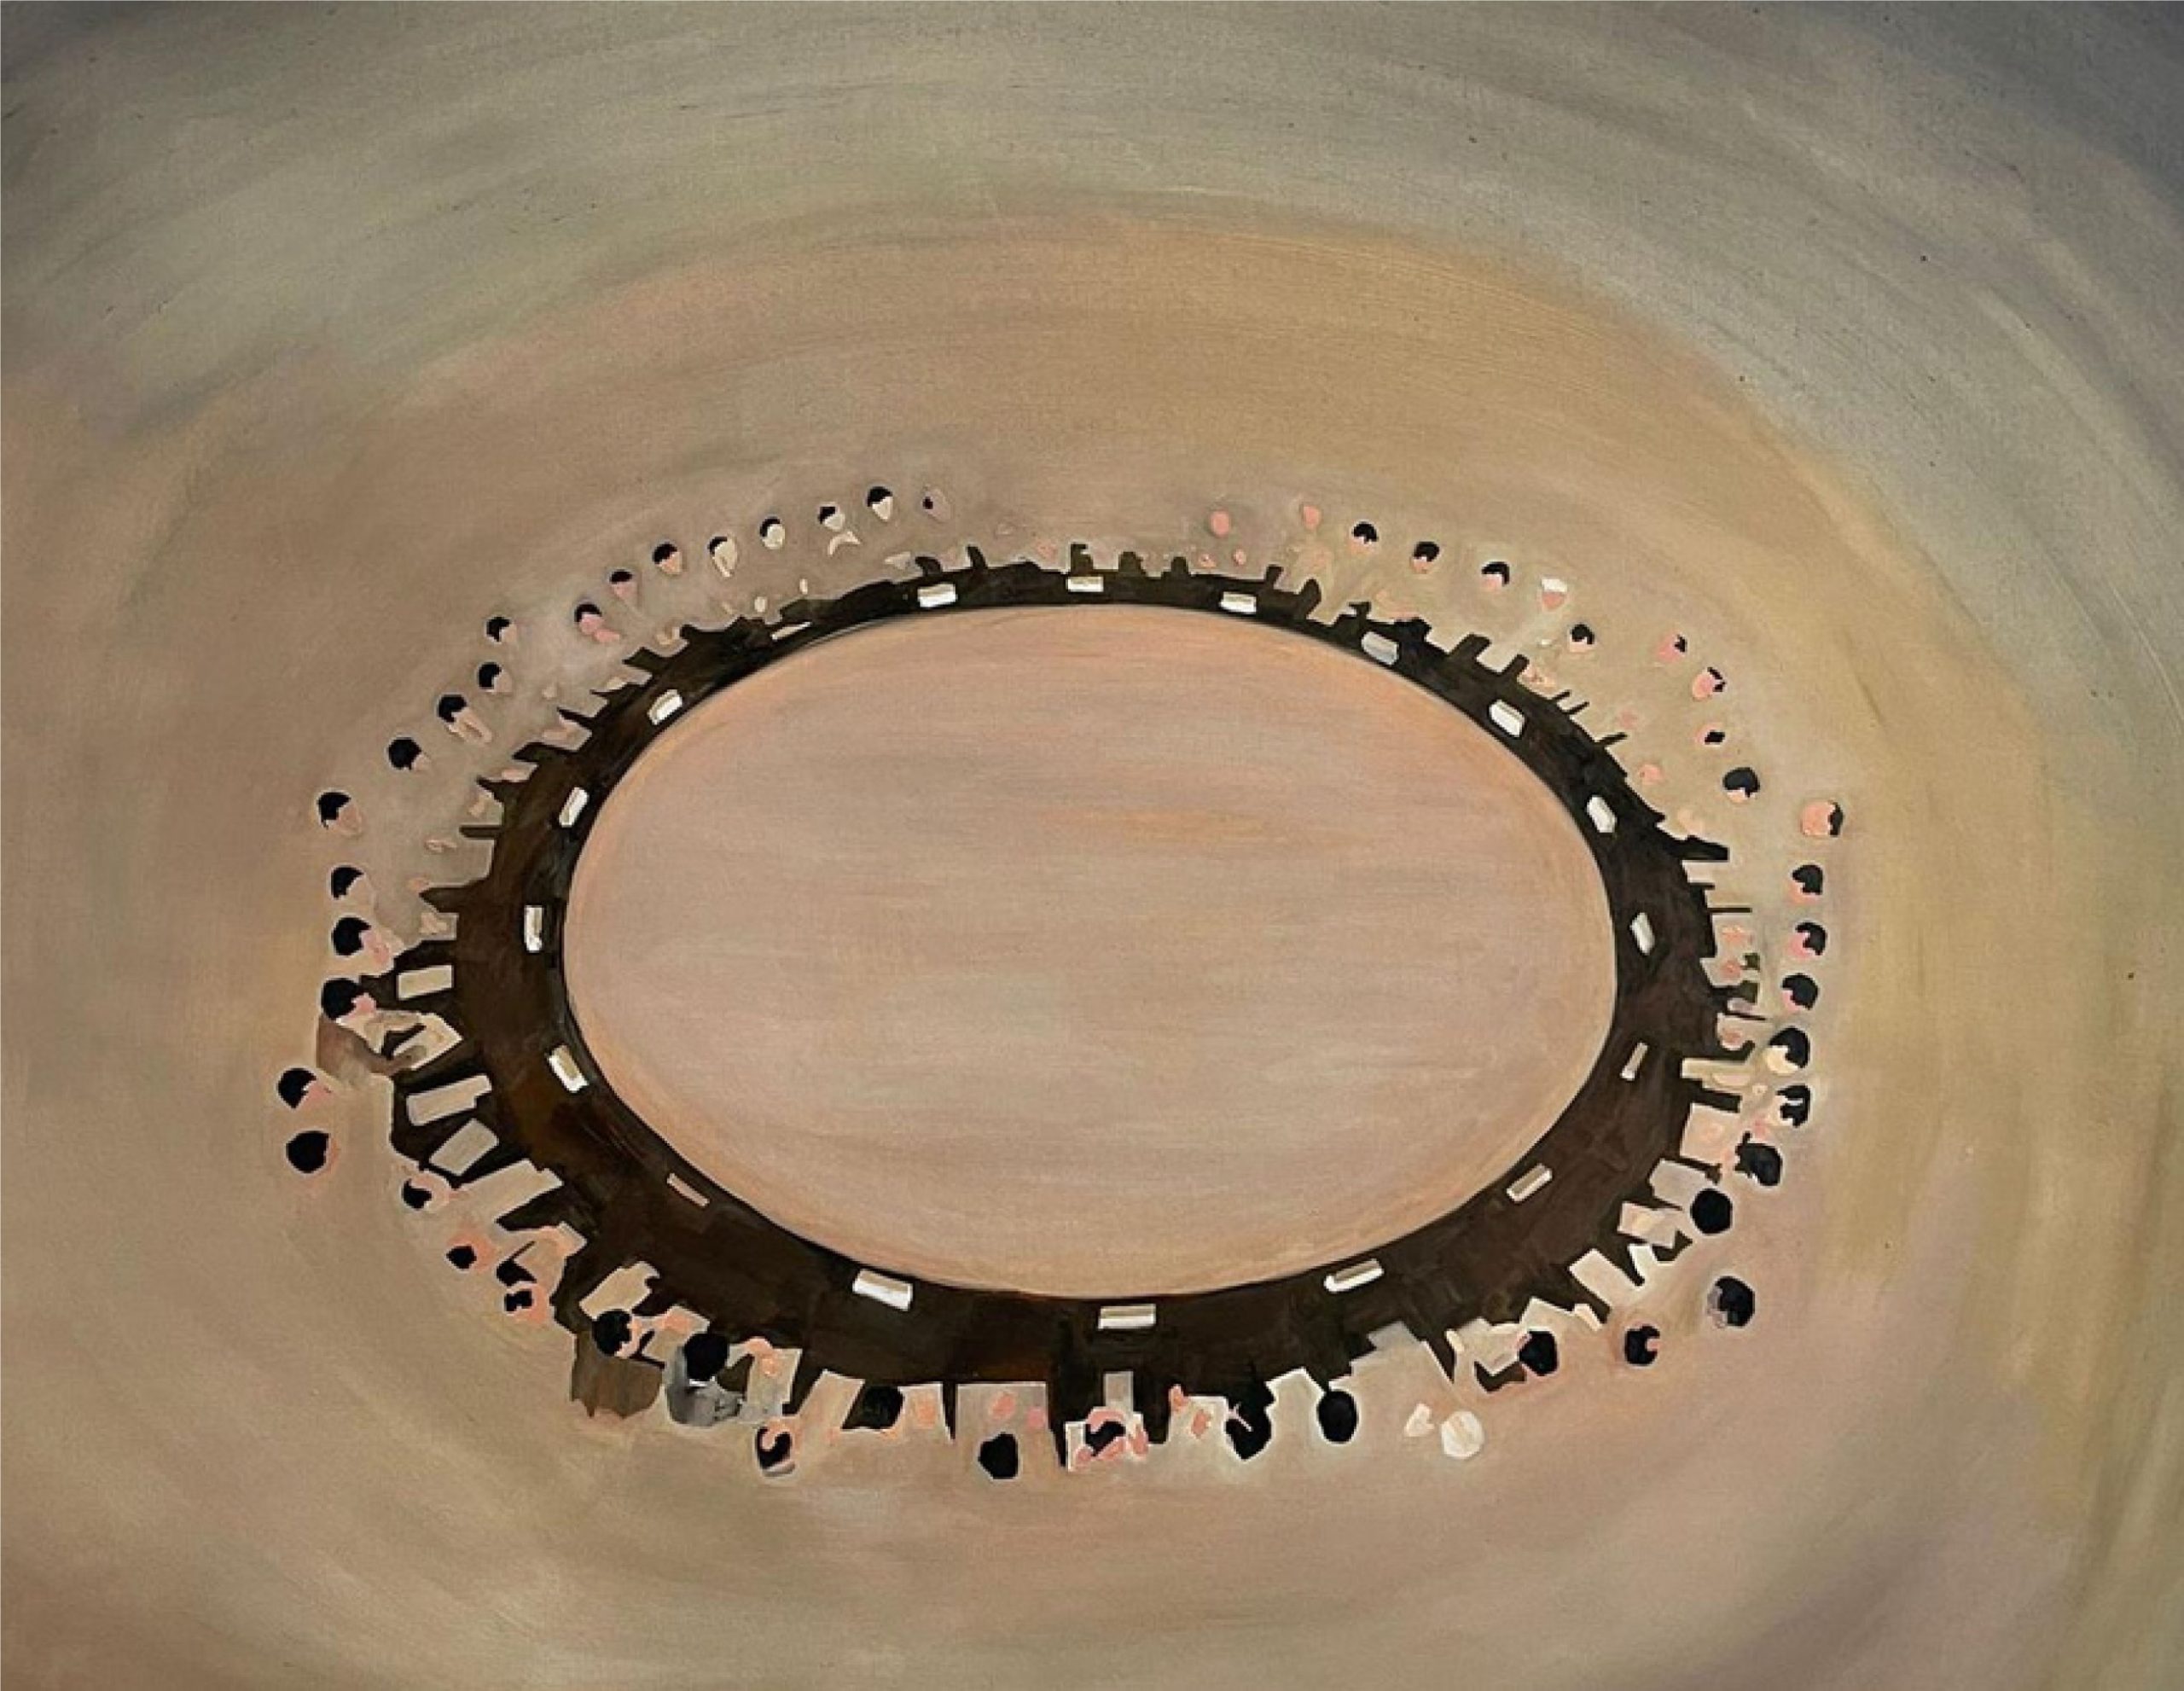 Round Table, 2022  - Oil on canvas 55 x 56.7 in (139.7 x 144 cm)